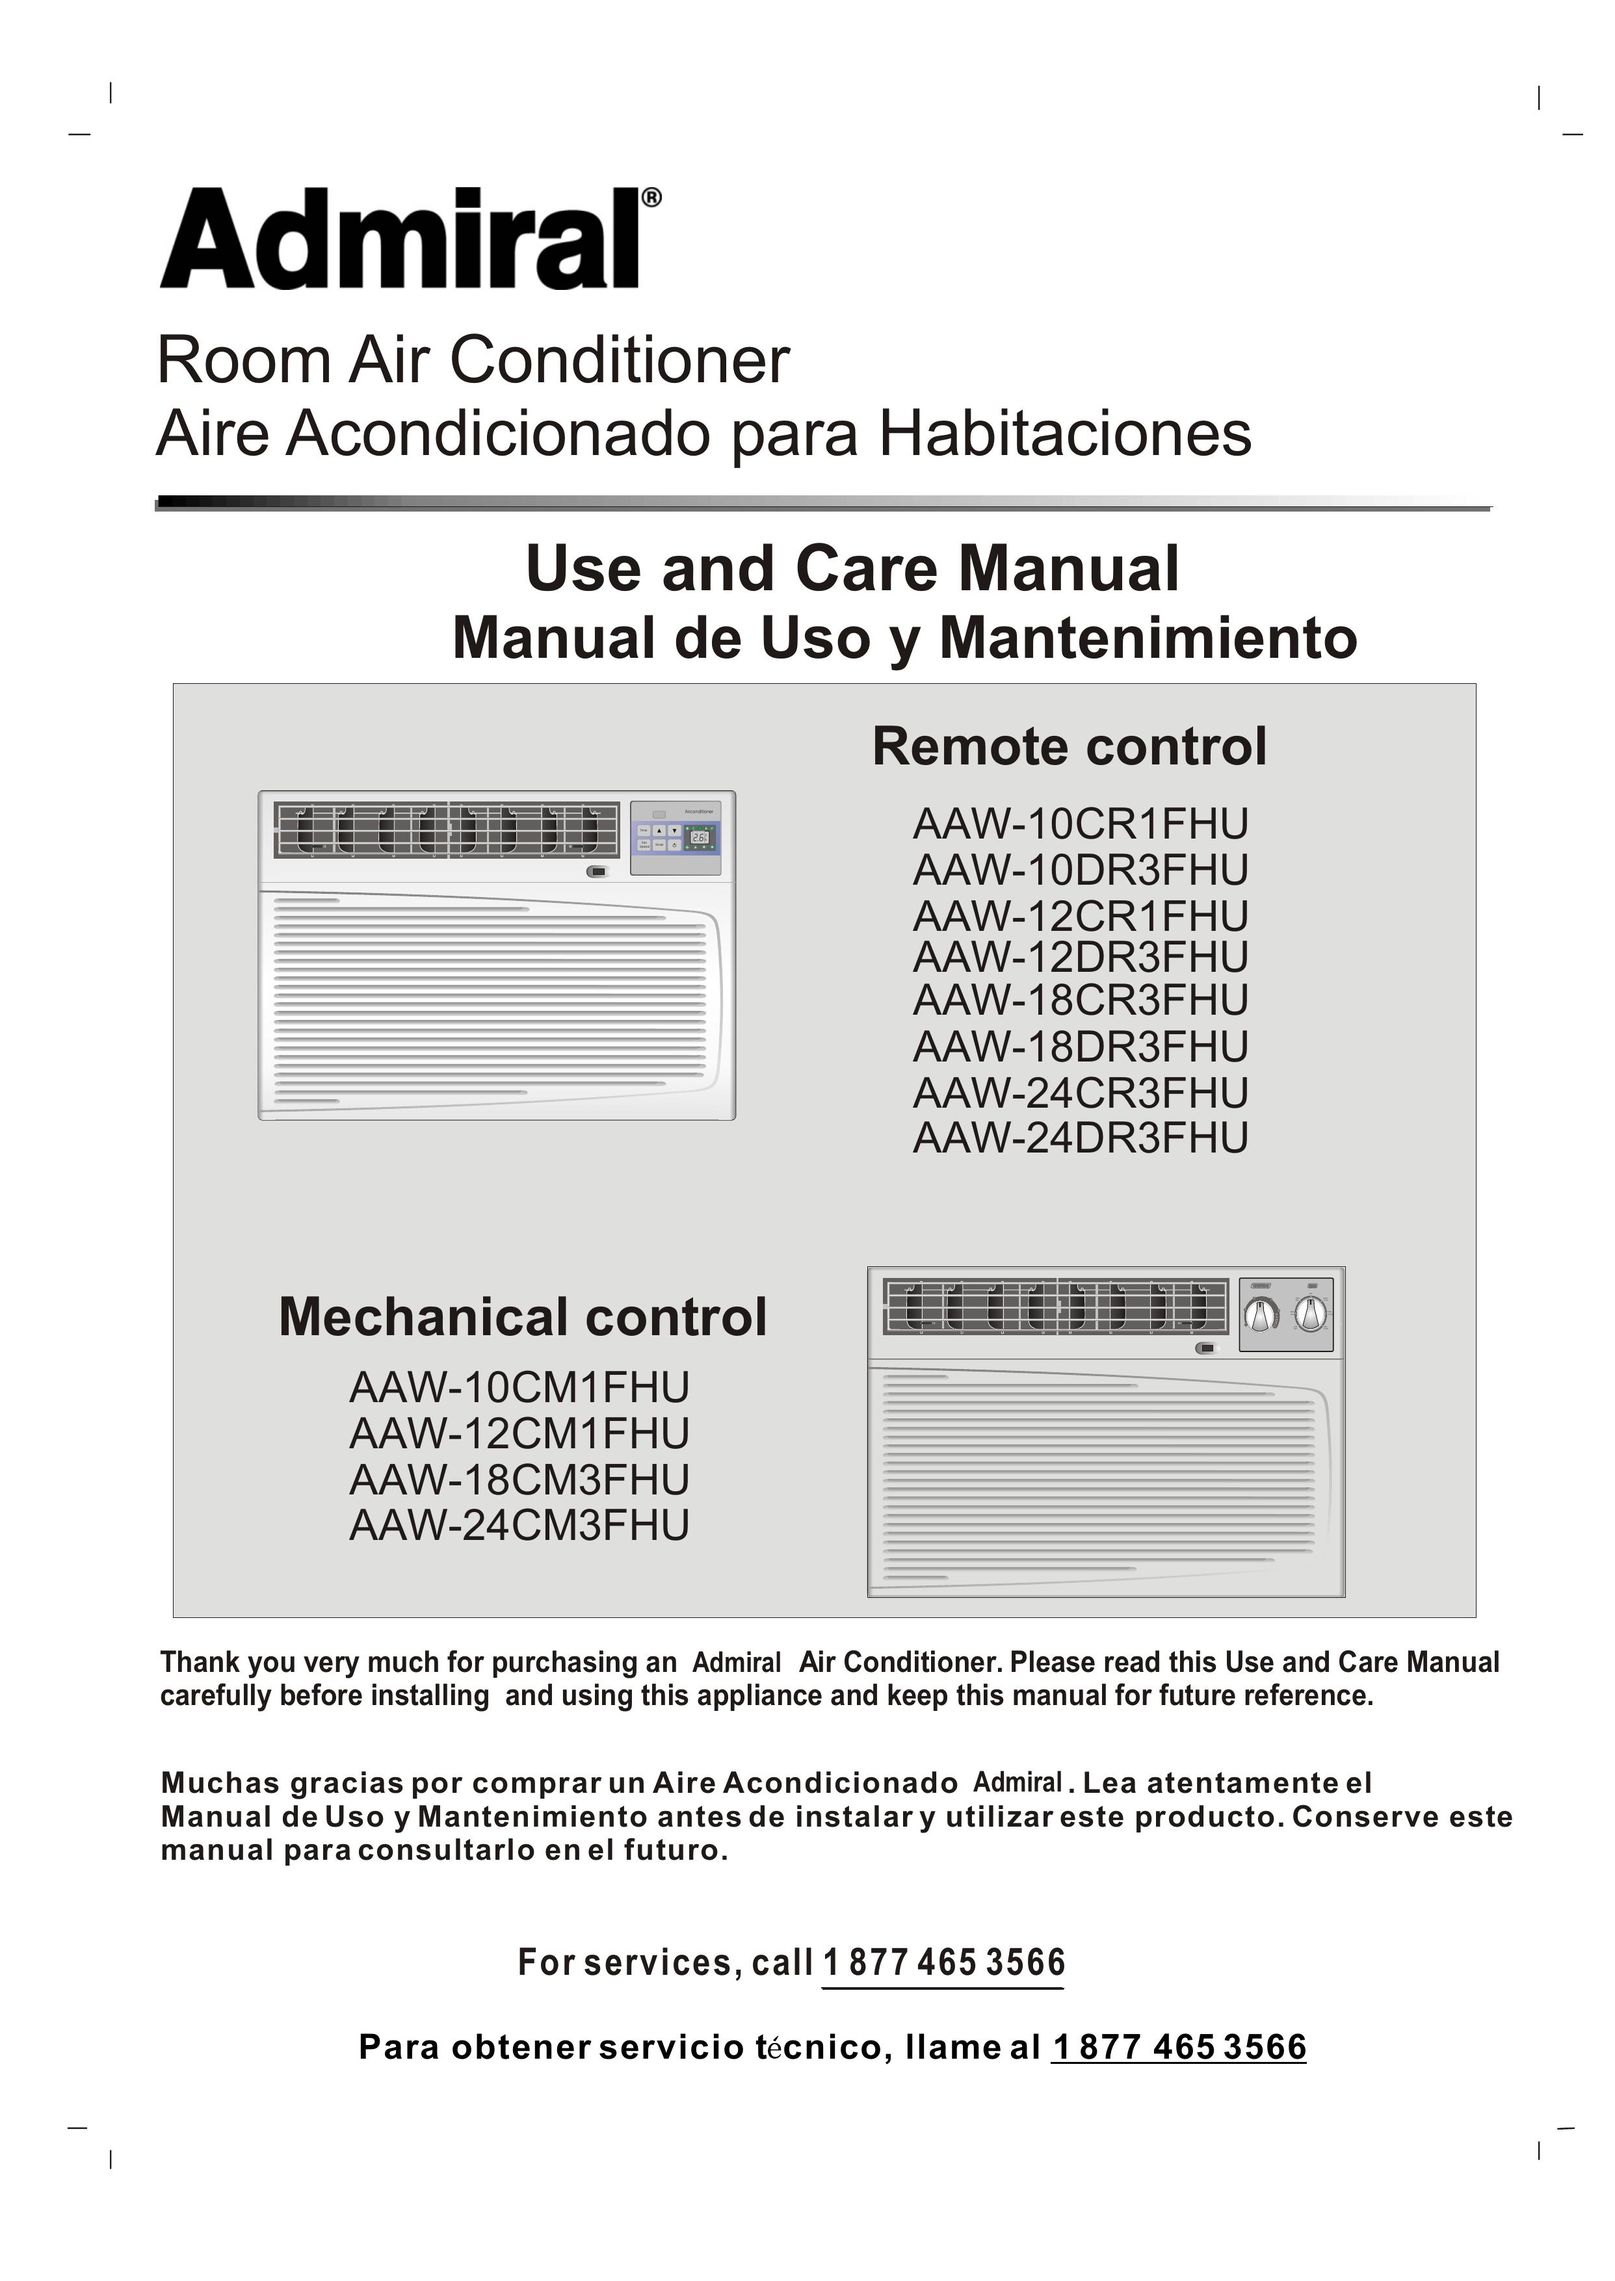 Admiral AAW-10DR3FHU Air Conditioner User Manual (Page 1)